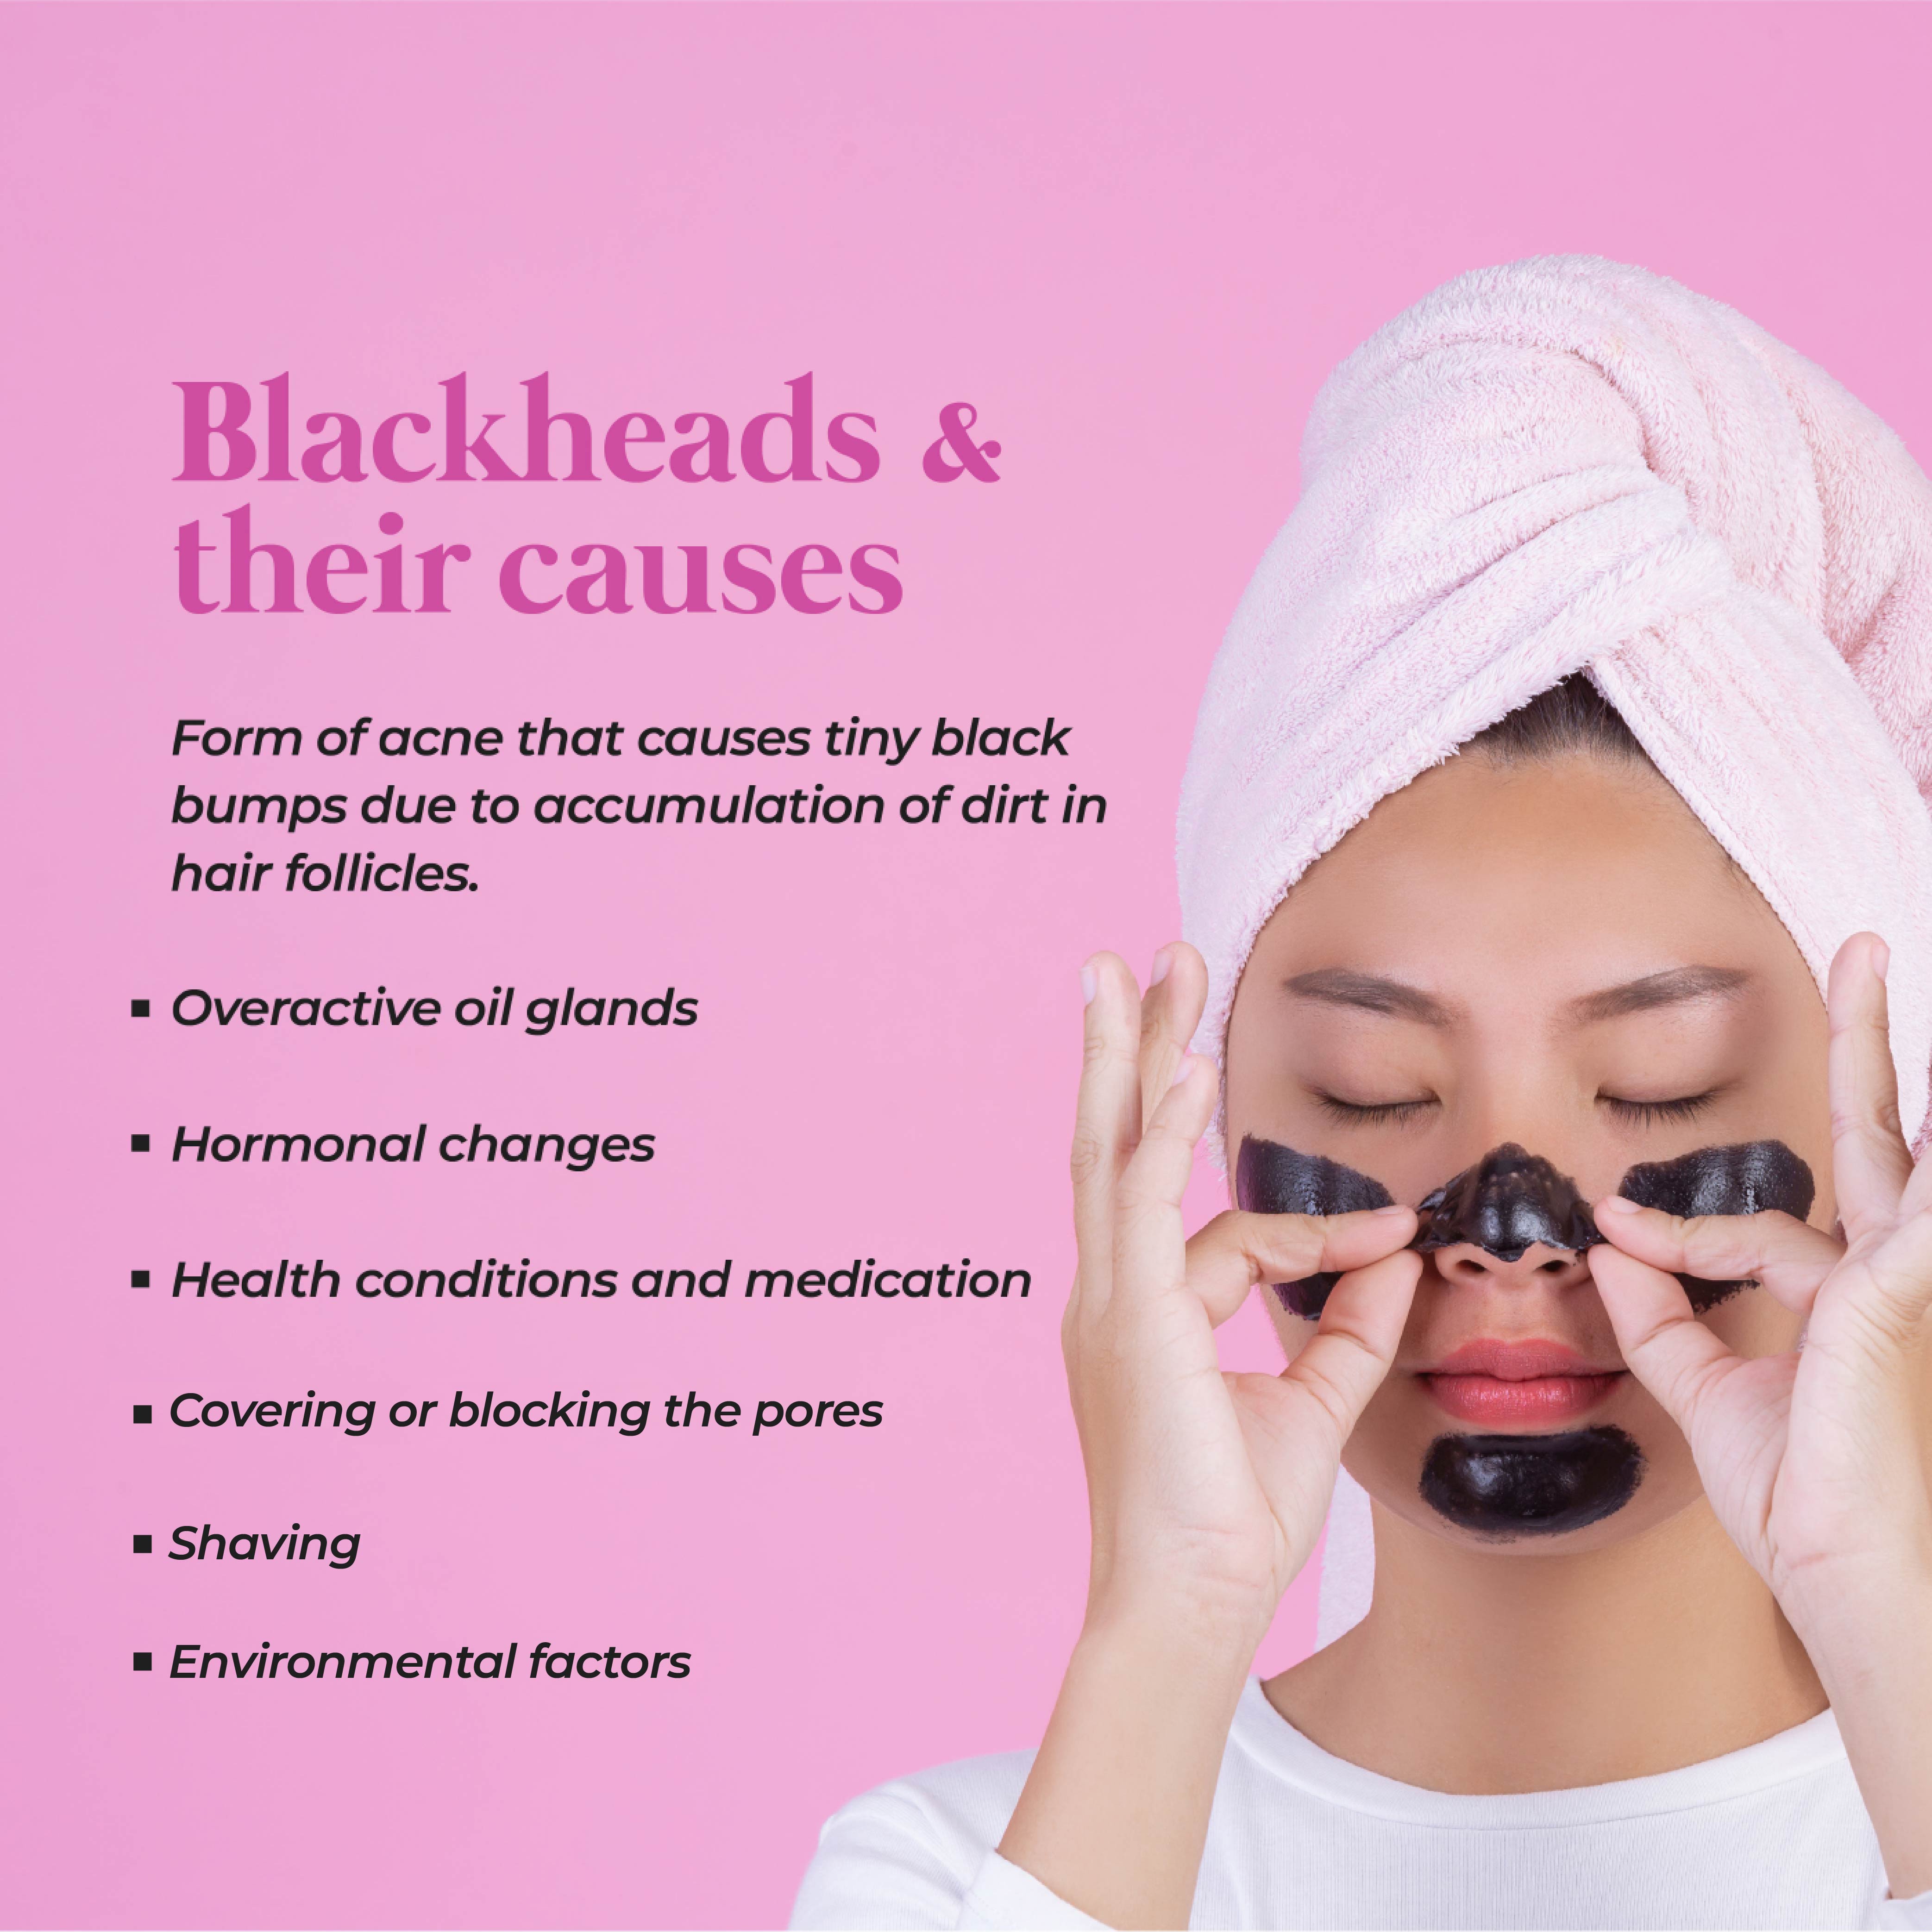 This is an image of what are blackheads and their causes